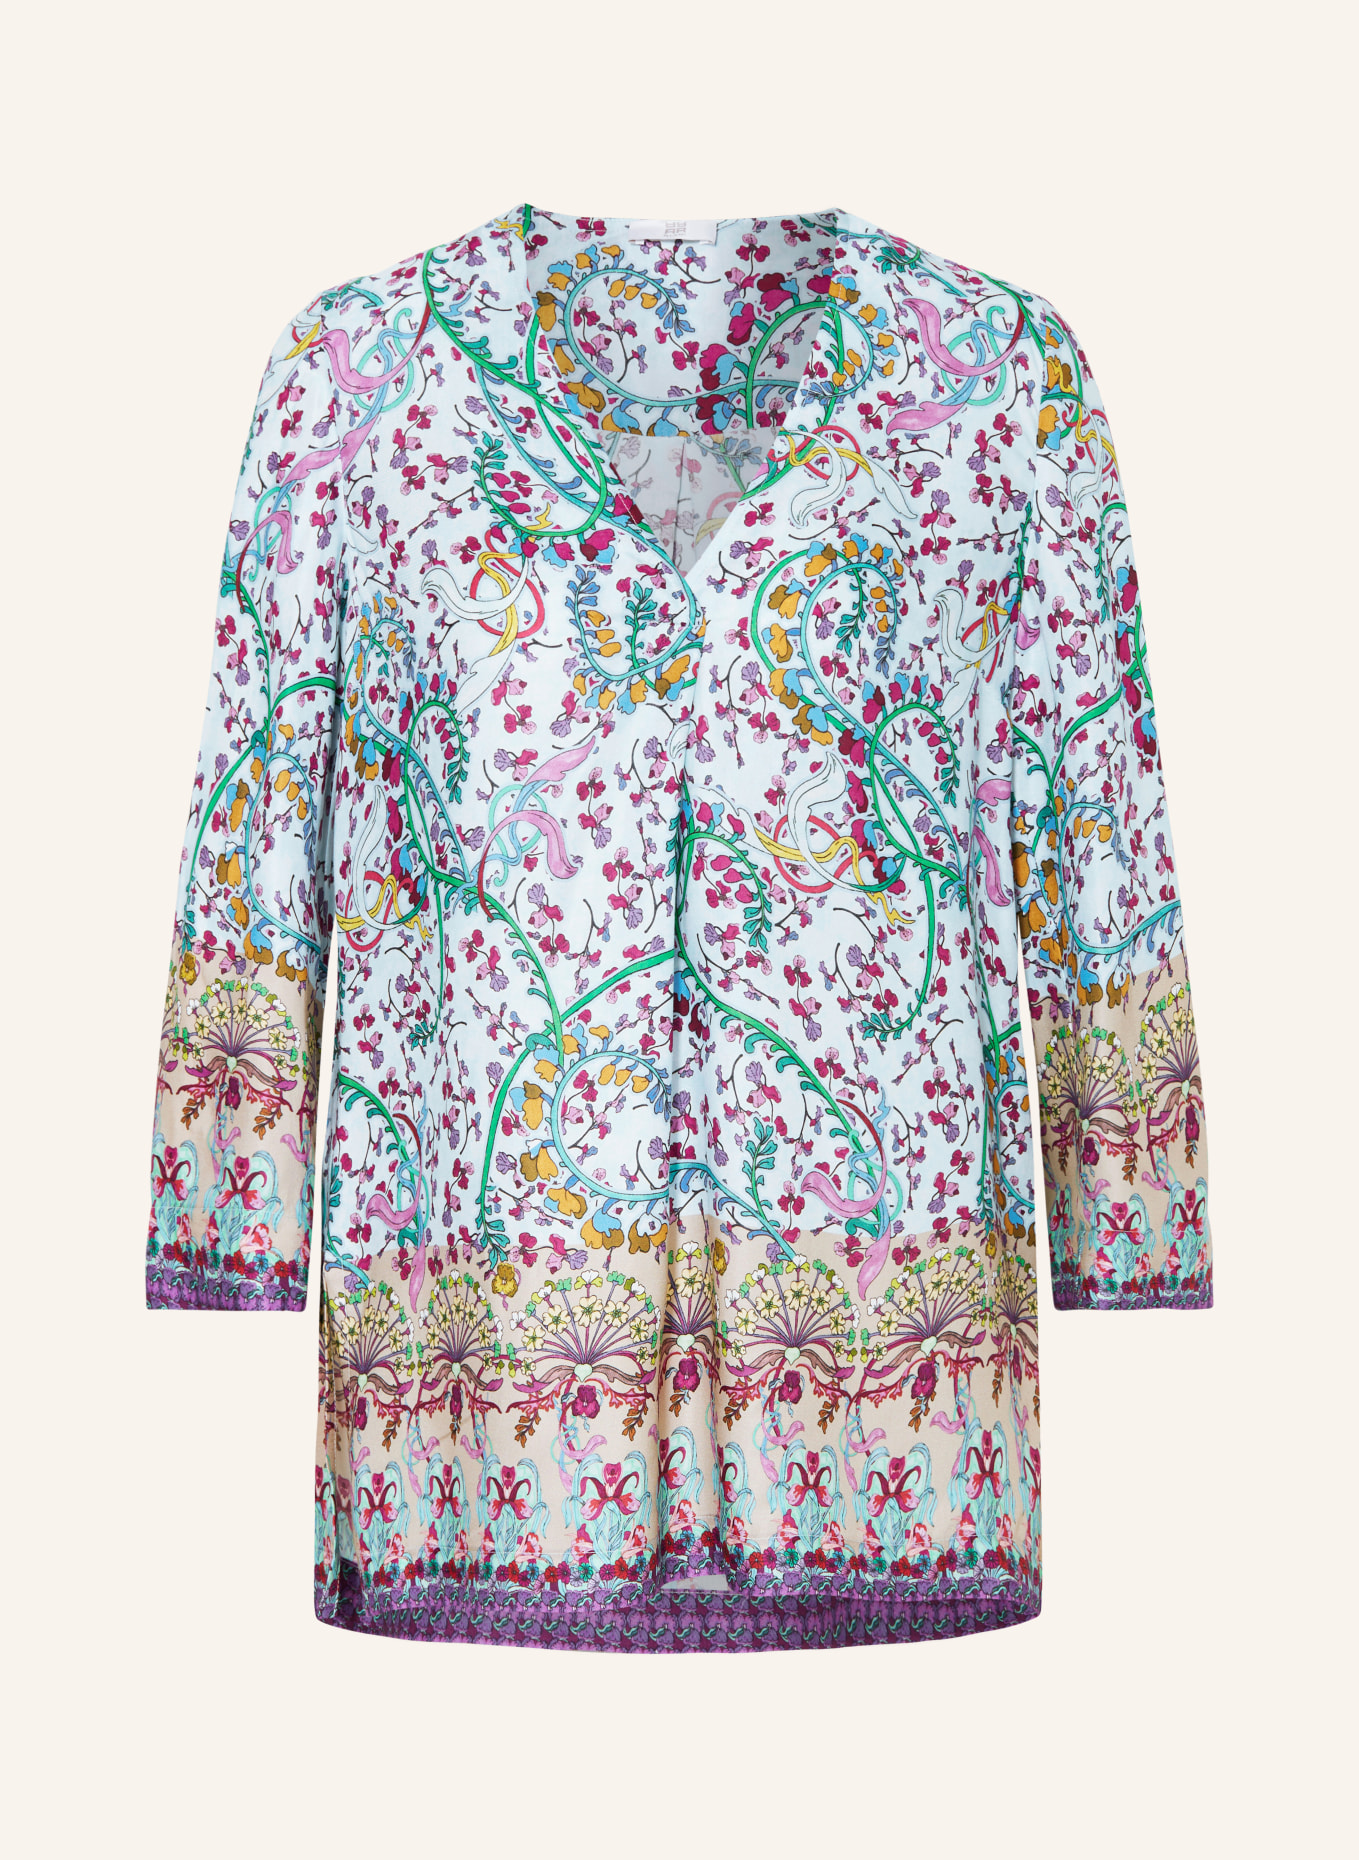 RIANI Shirt blouse with 3/4 sleeves, Color: LIGHT BLUE/ PURPLE/ GREEN (Image 1)